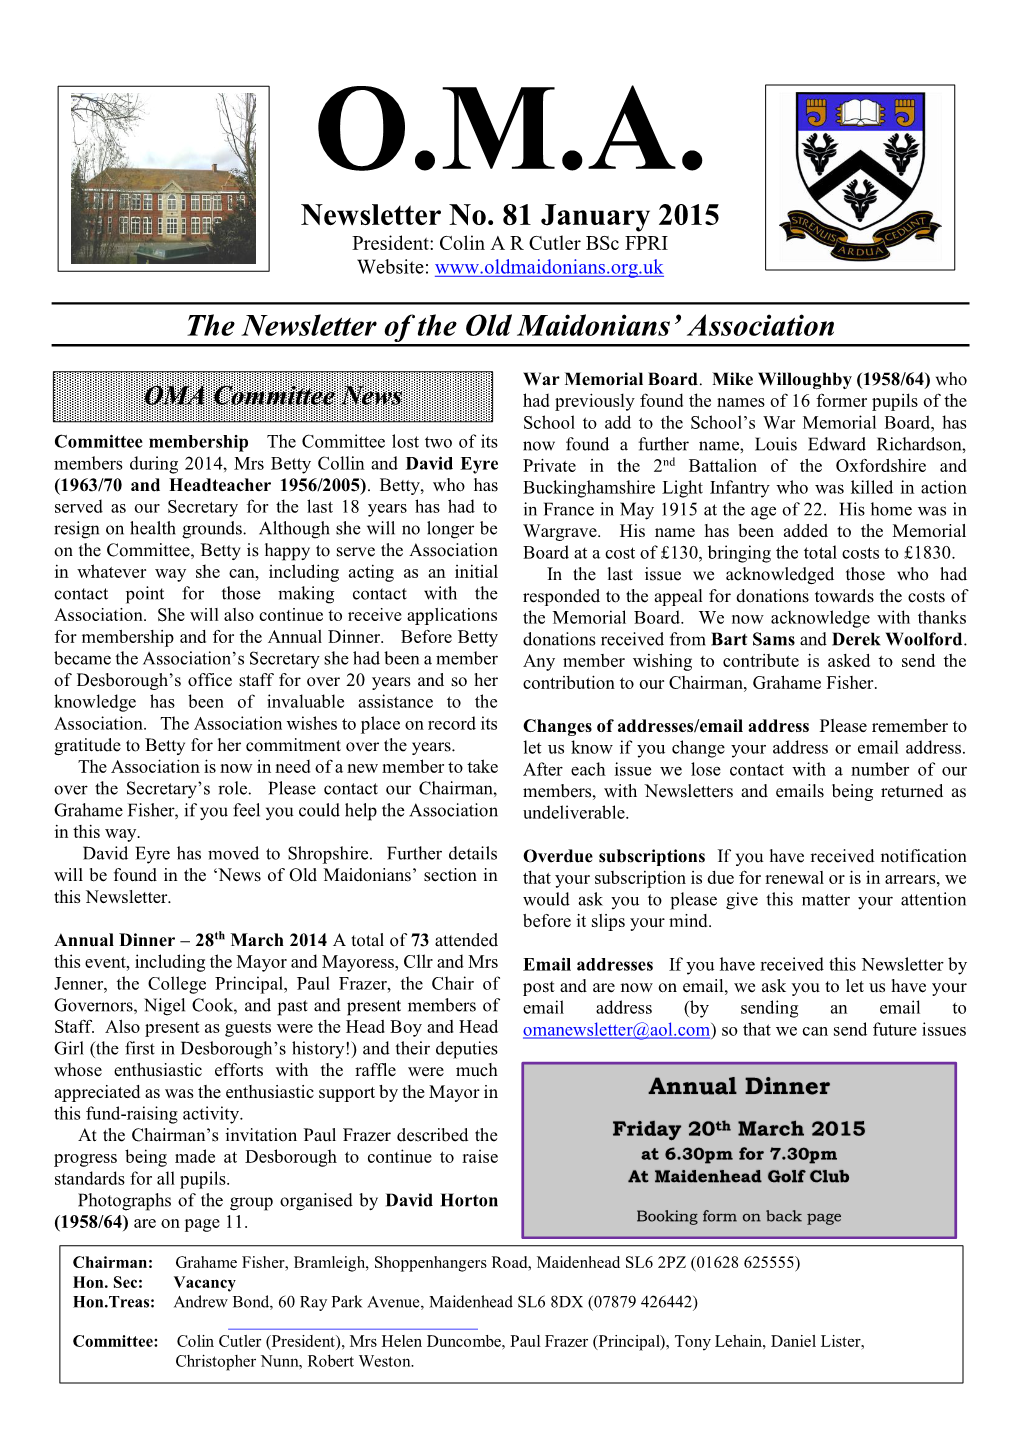 Newsletter No. 81 January 2015 the Newsletter of the Old Maidonians